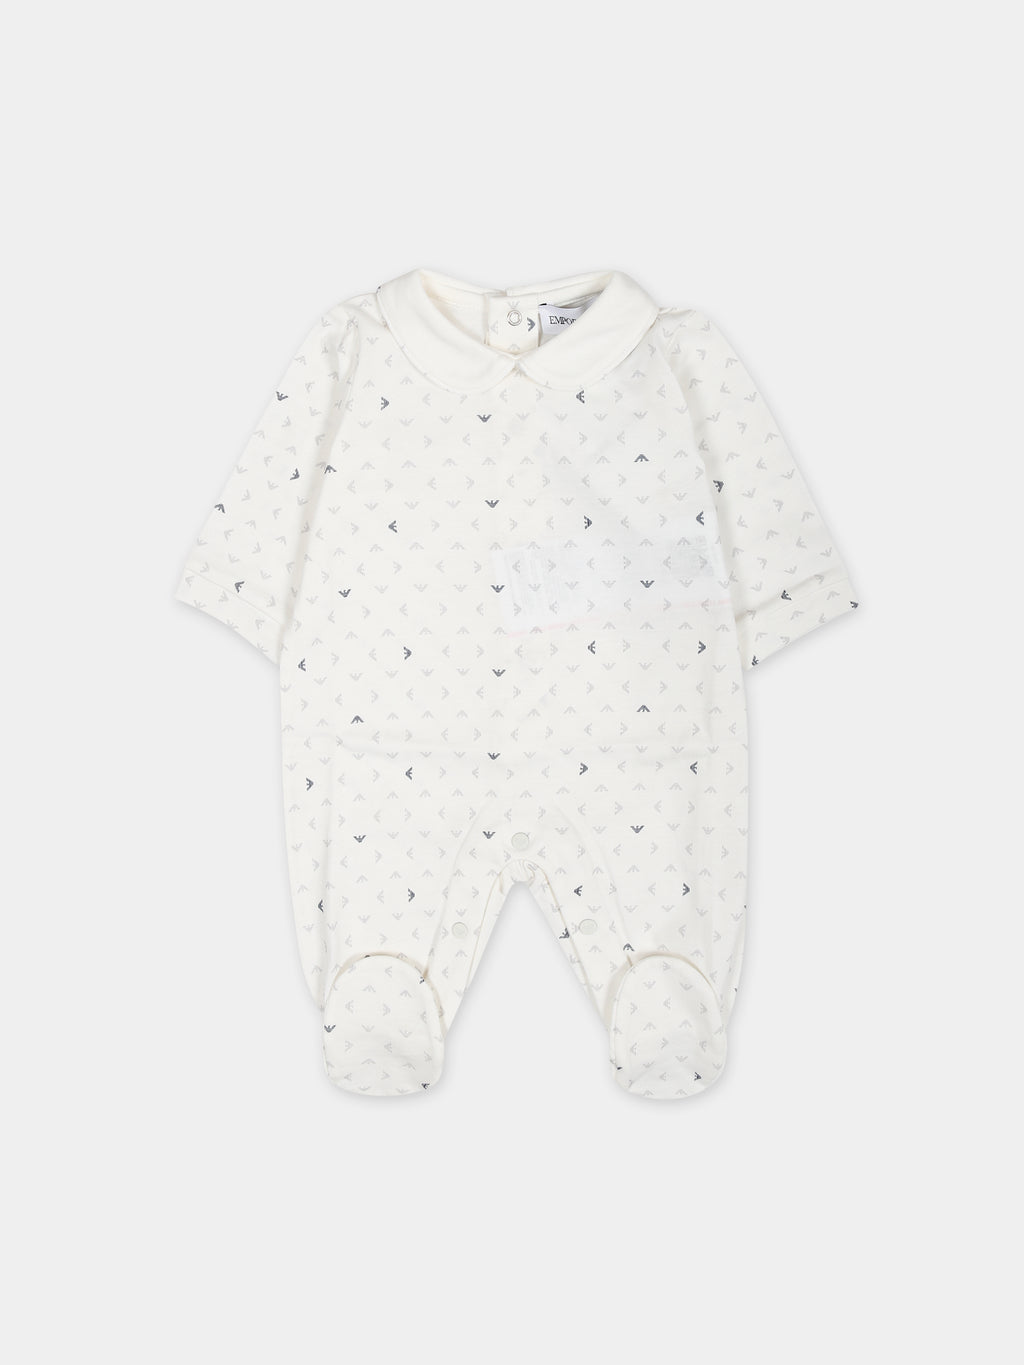 Ivory playsuit for baby boy with all-over eagle logo